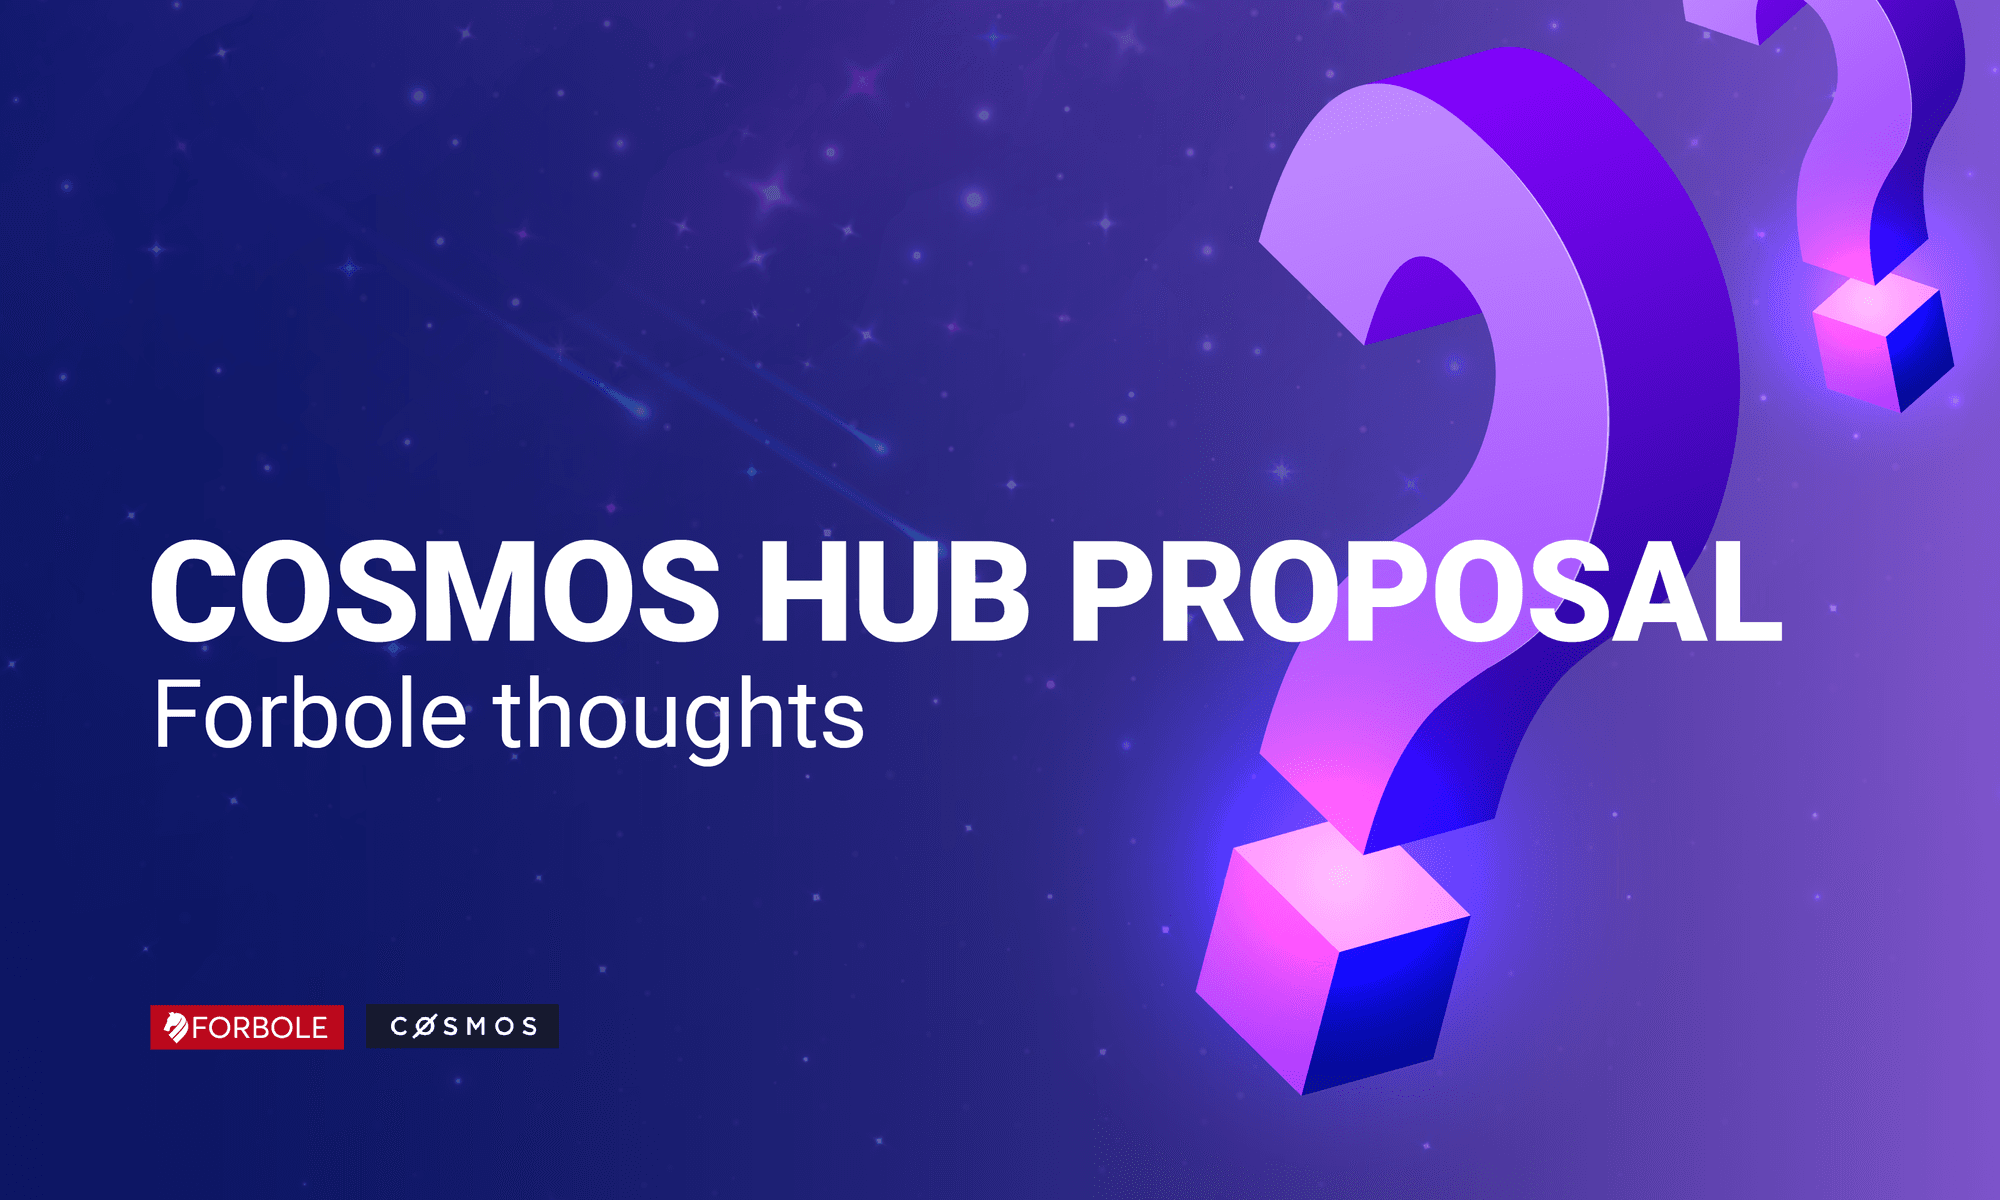 Forbole’s thought on Cosmos Hub Proposal 31 and 32